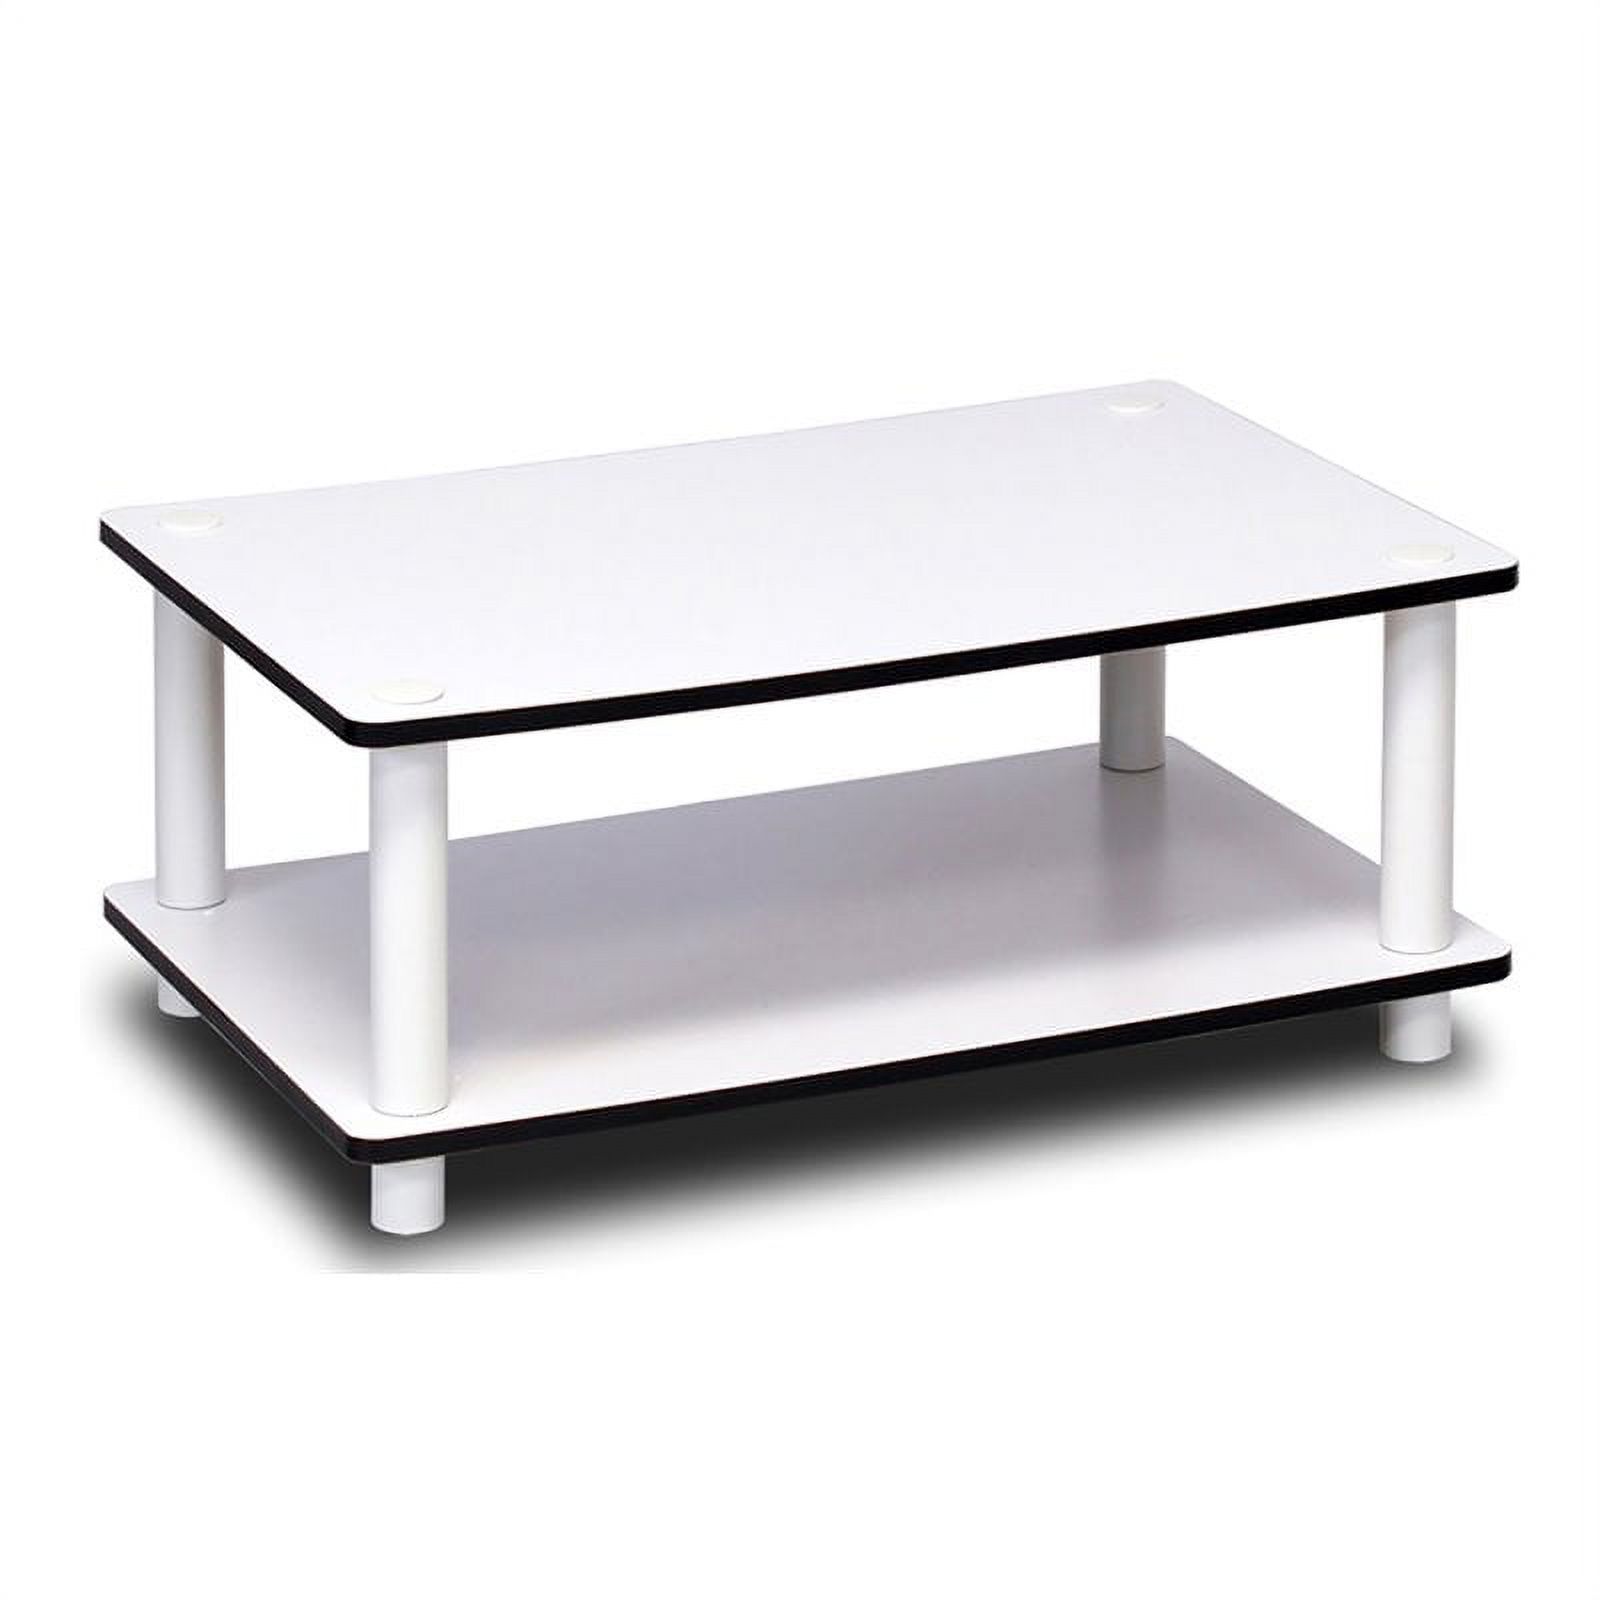 Furinno 11172 Just 2-Tier No-Tools Coffee Table, White - image 2 of 5